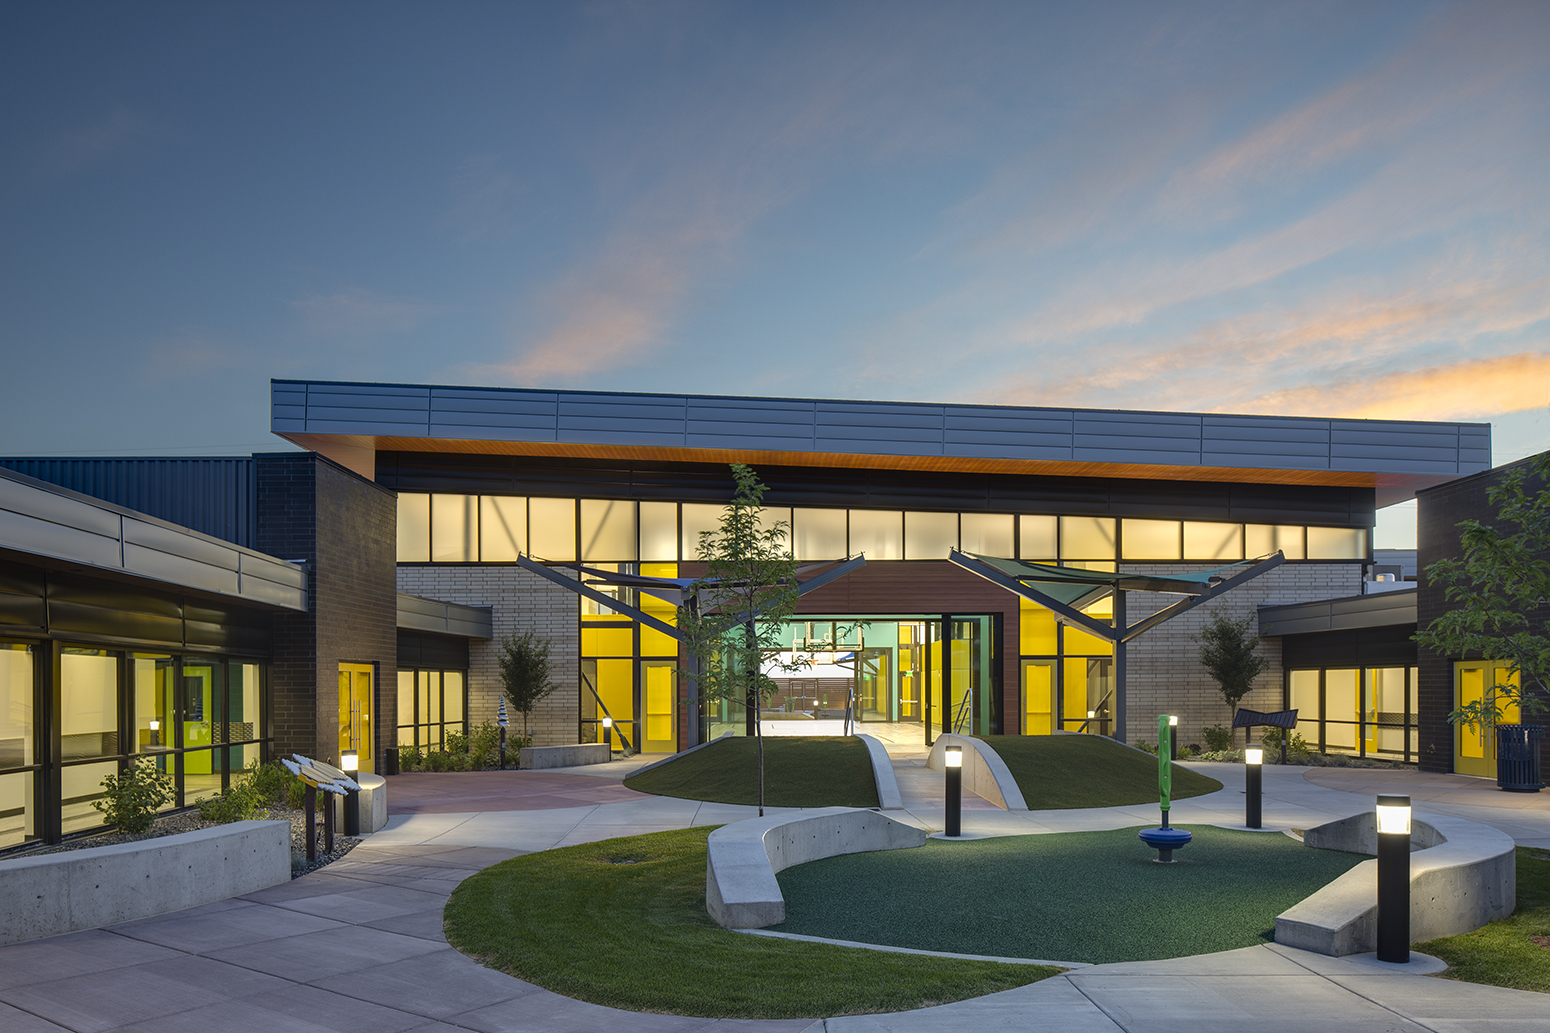 Utah School for the Deaf & Blind for Jacoby ArchitectsArchitectural Photography by Paul Richer / RICHER IMAGES